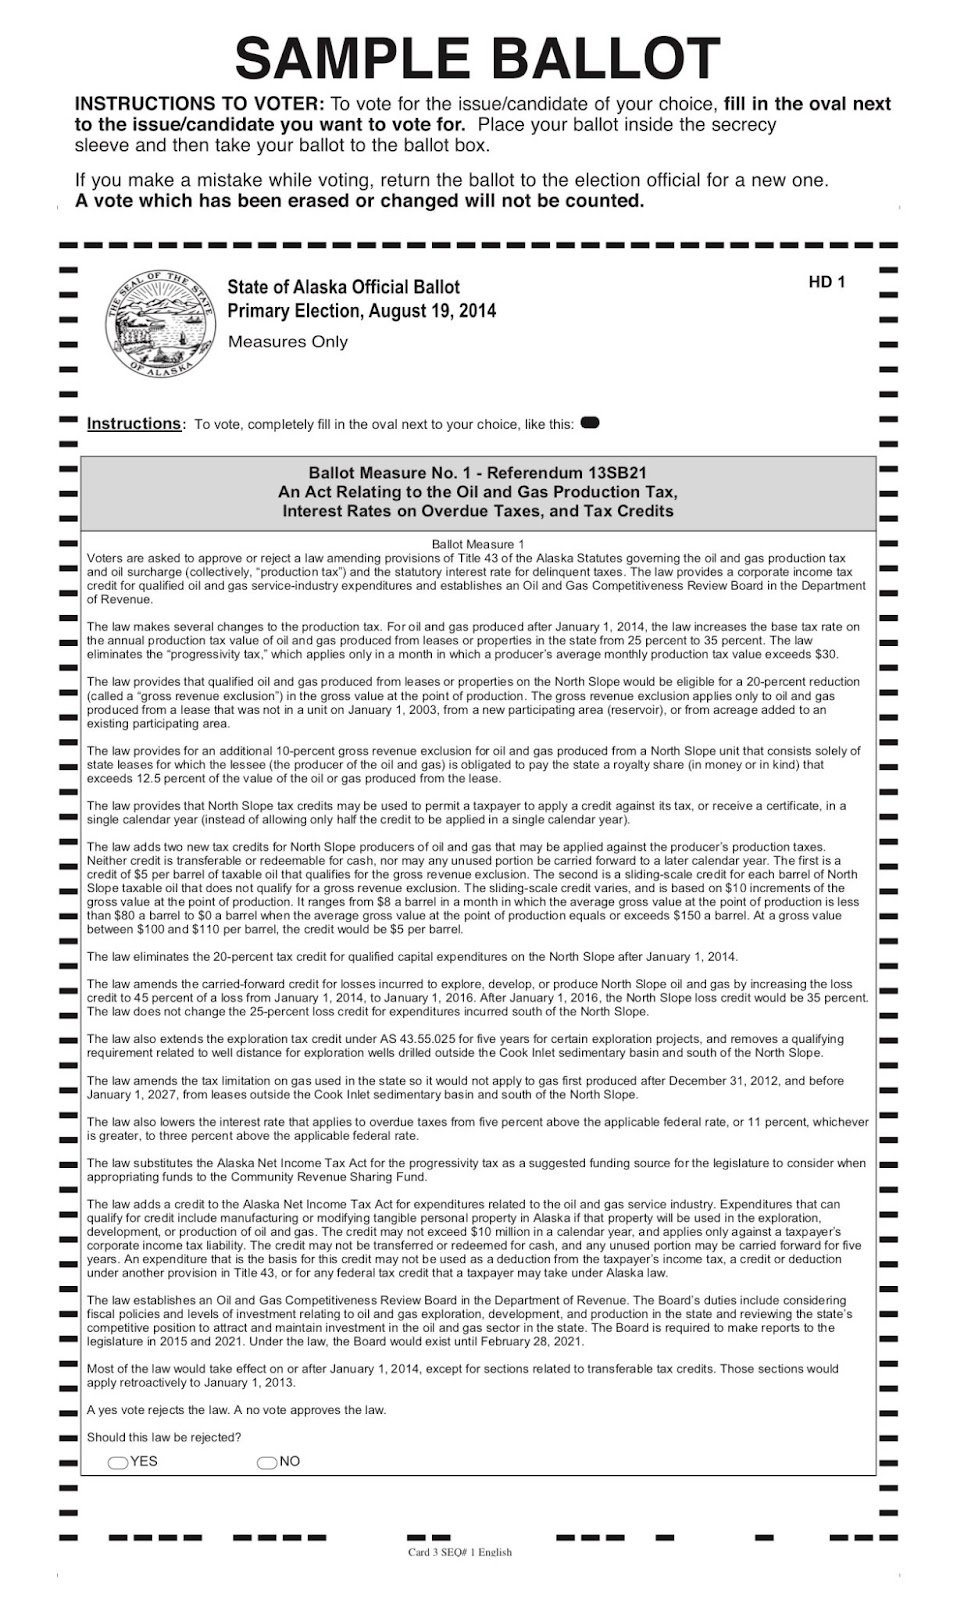 Sample ballot with the question taking up the entire page. Text is available in the link below.